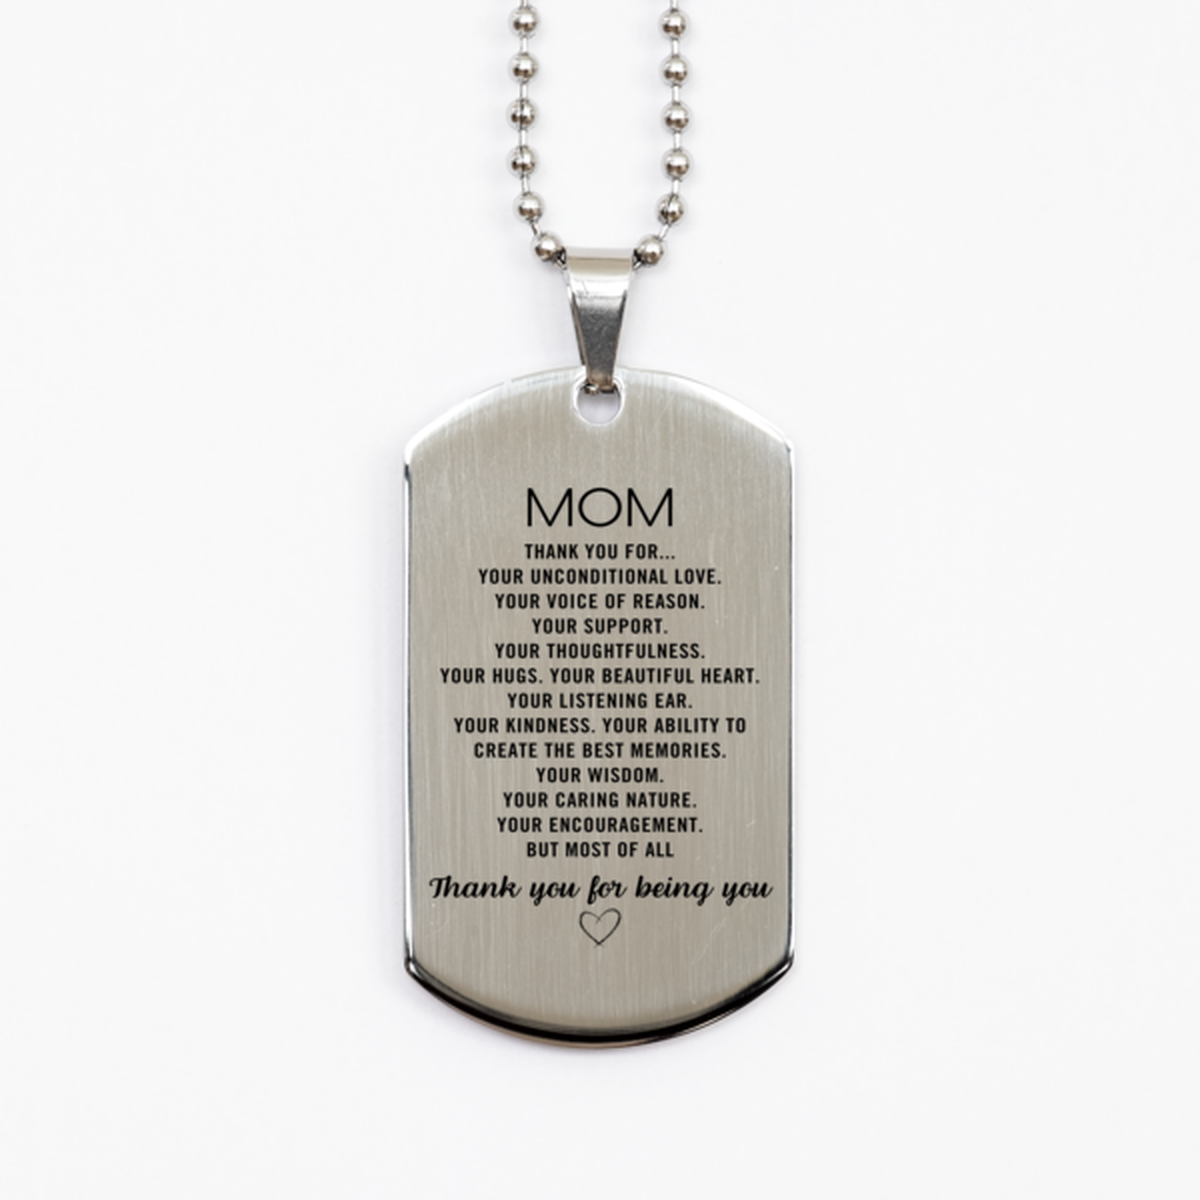 Mom Silver Dog Tag Custom, Engraved Gifts For Mom Christmas Graduation Birthday Gifts for Men Women Mom Thank you for Your unconditional love